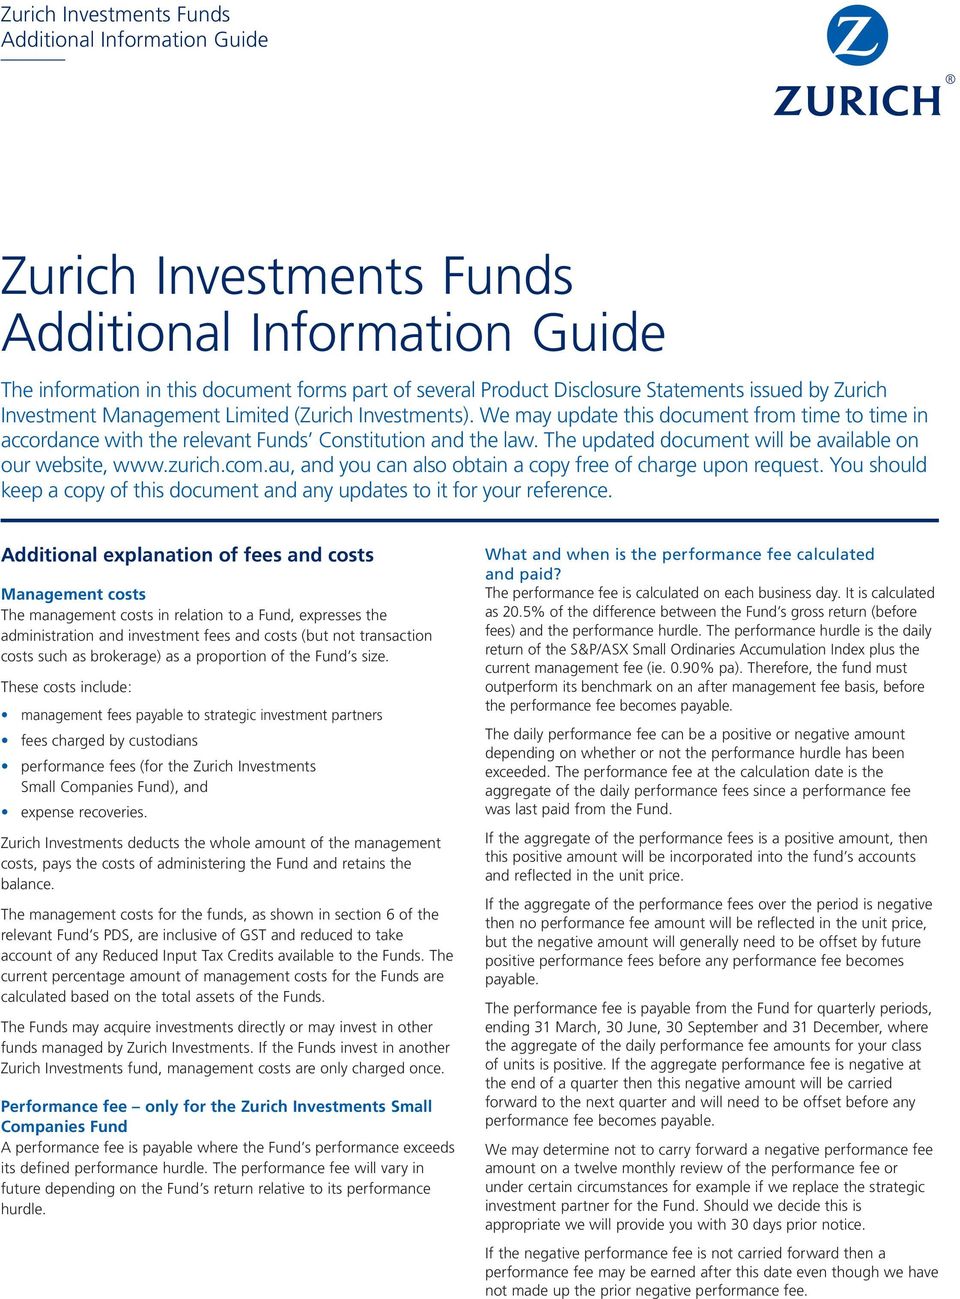 The updated document will be available on our website, www.zurich.com.au, and you can also obtain a copy free of charge upon request.